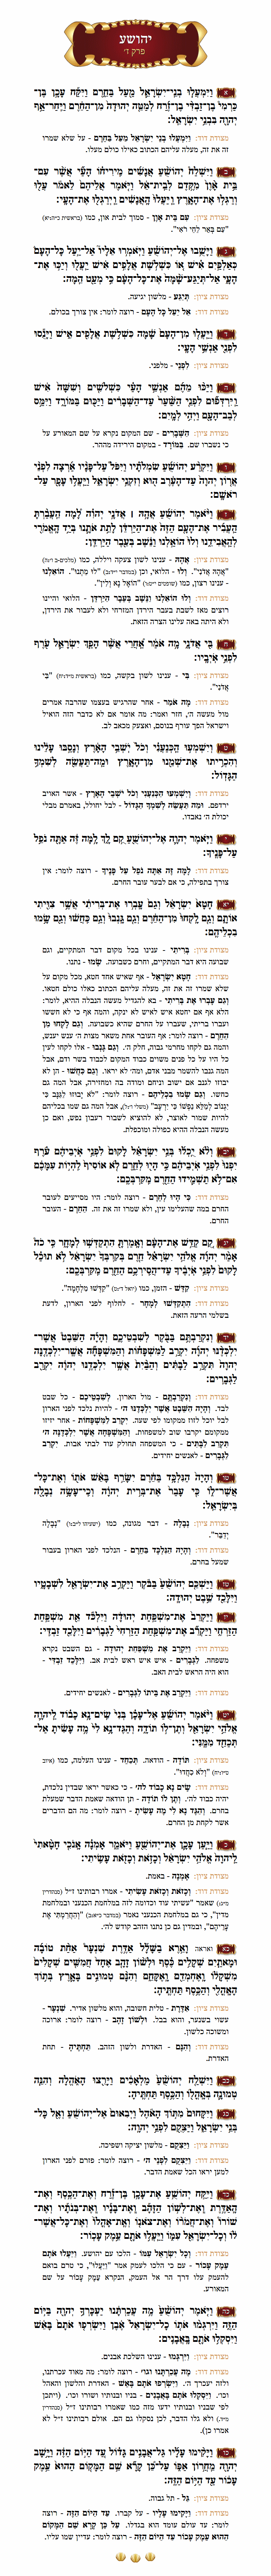 Sefer Yehoshua Chapter 7 with commentary